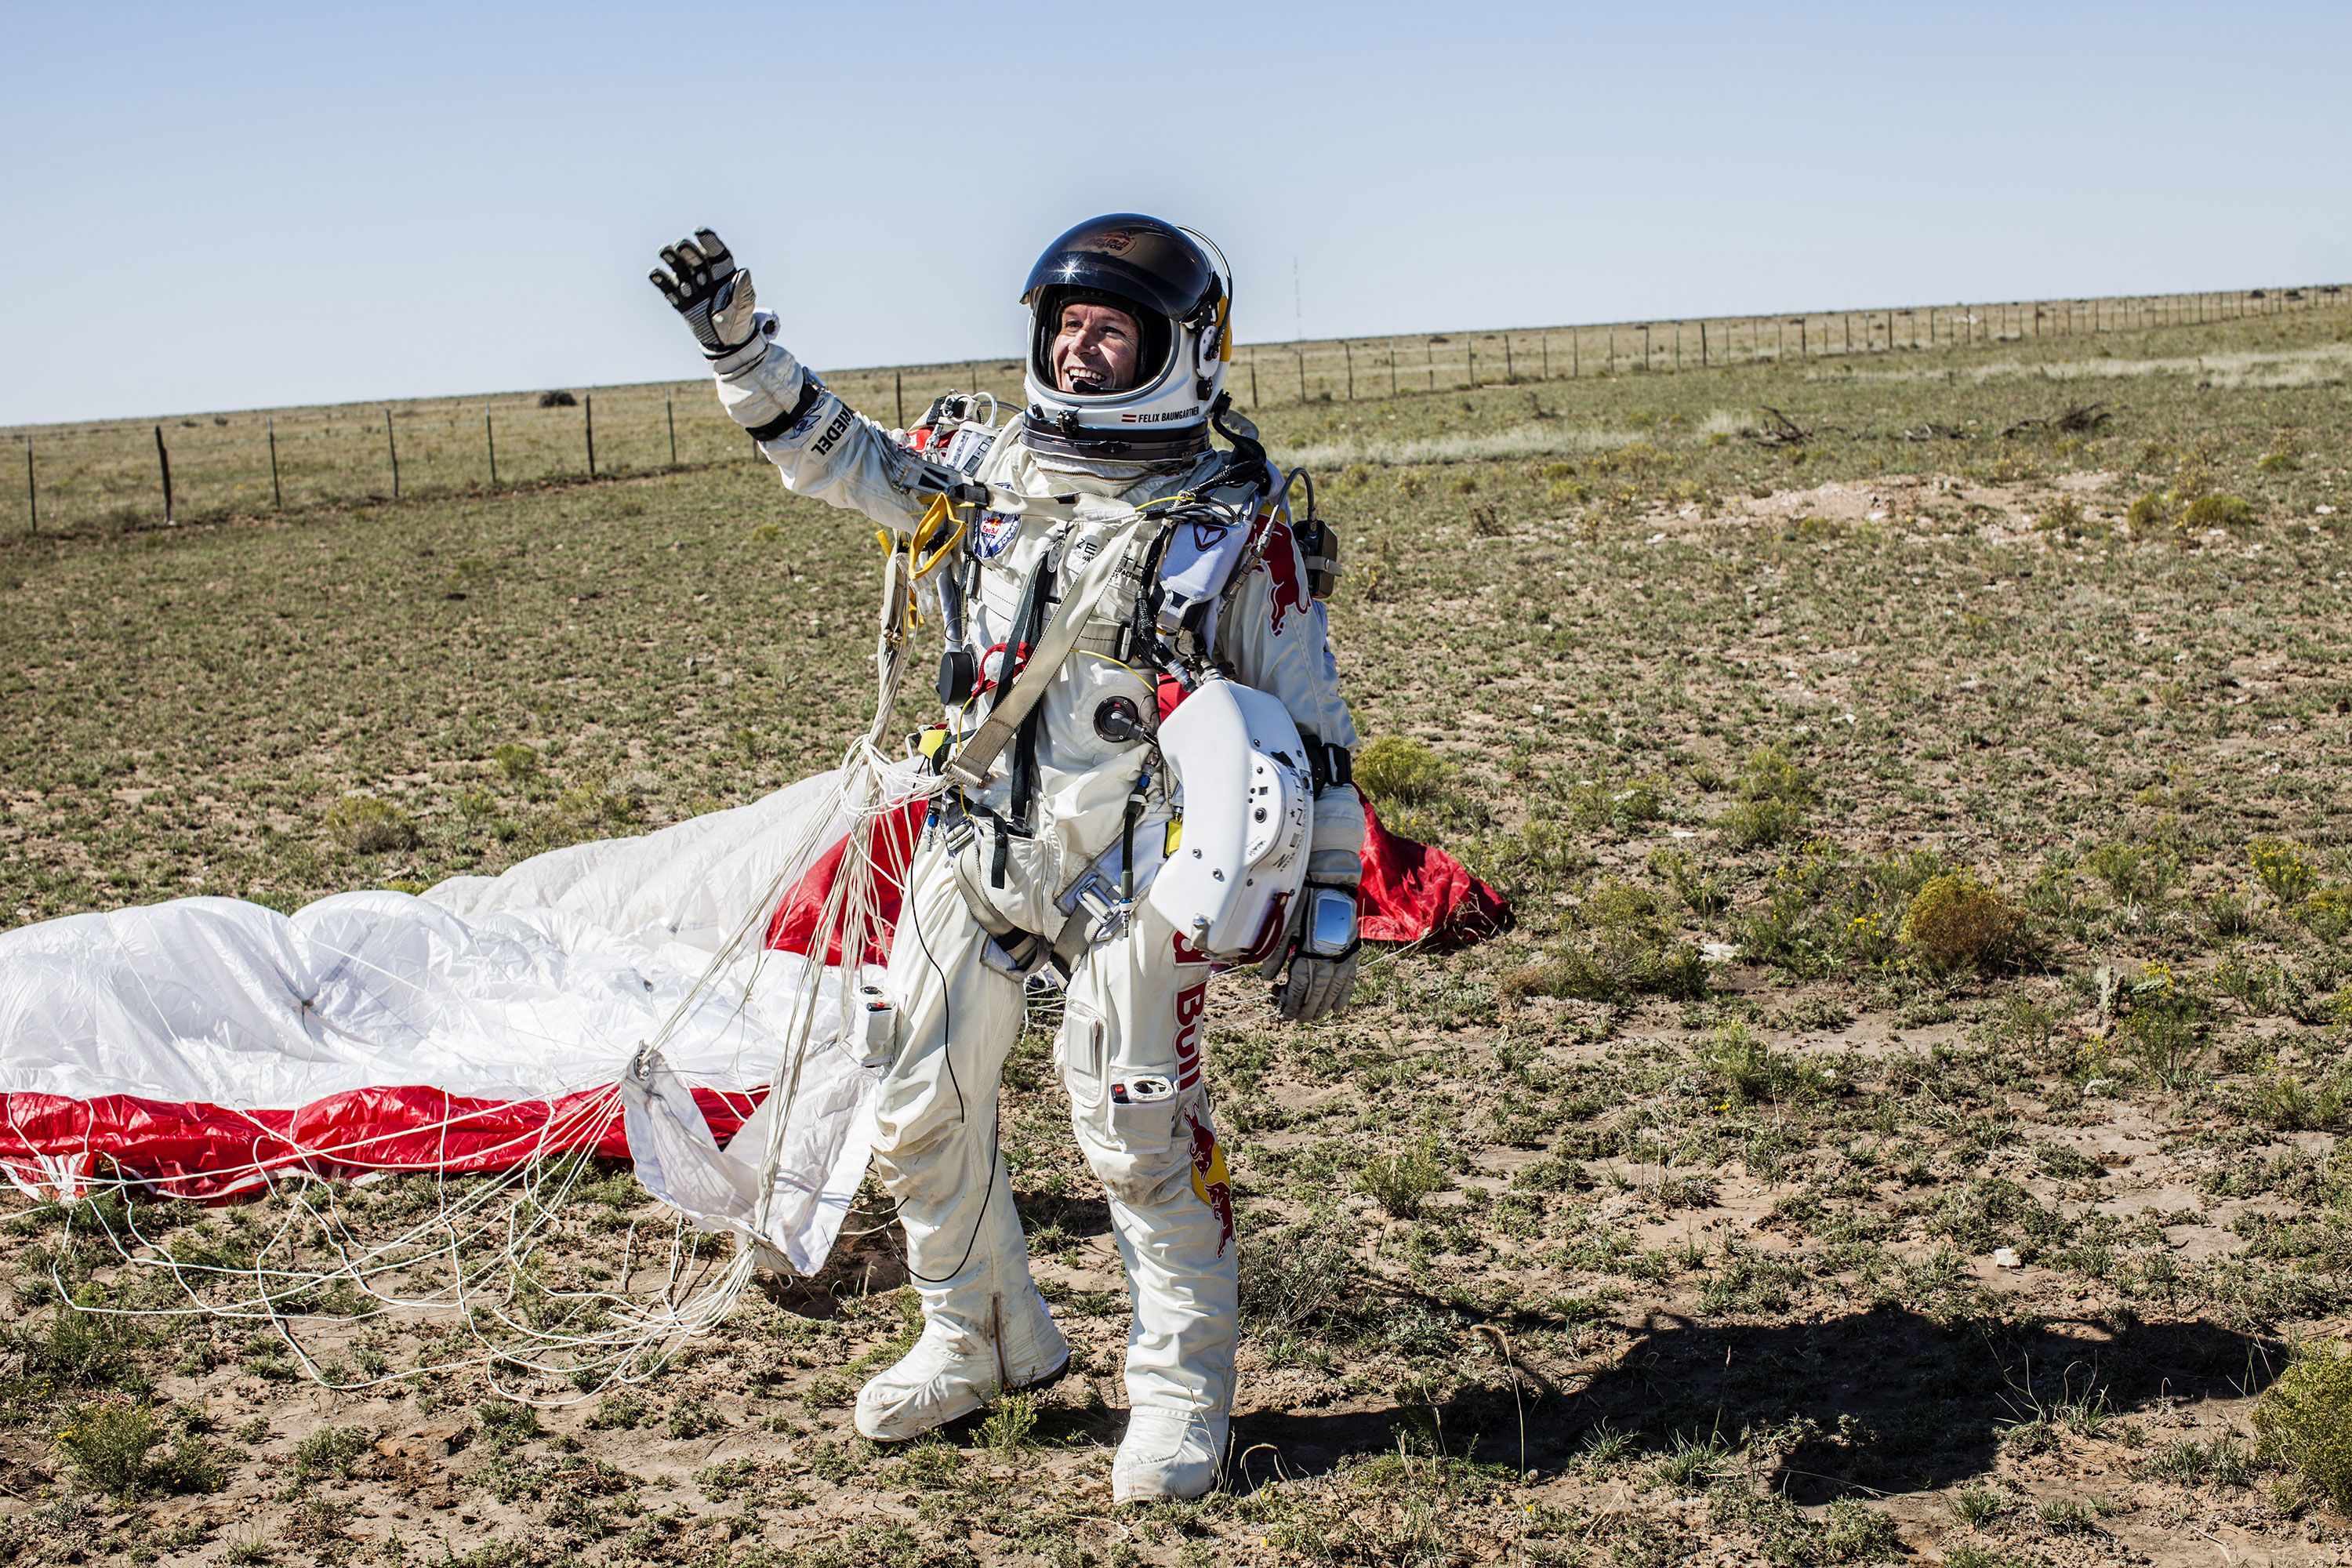 spole pålidelighed Cornwall Felix Baumgartner: 10 years on, the man who fell to Earth is still awed by  experience | CNN